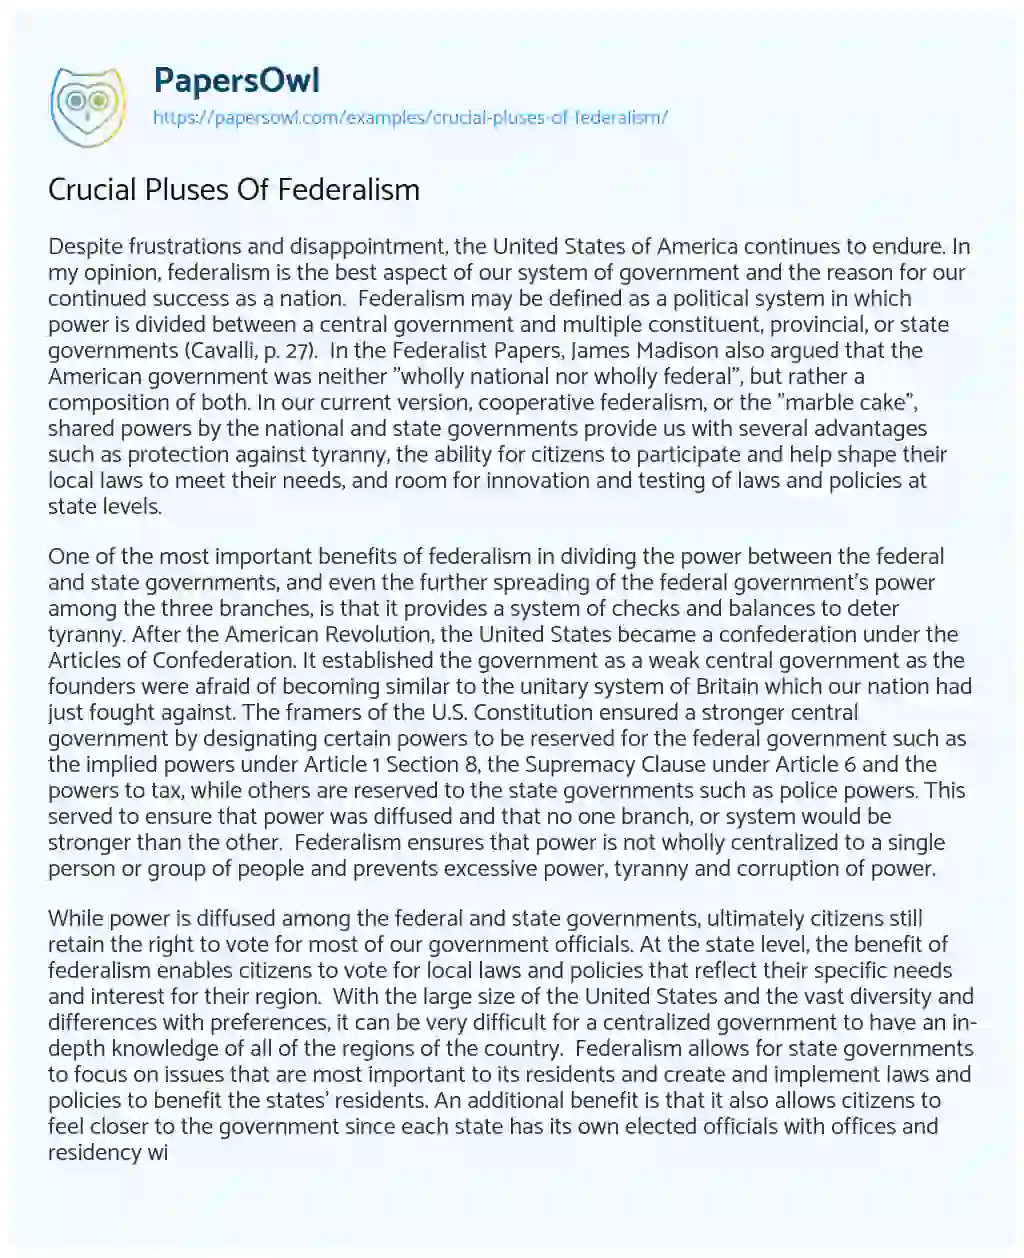 Essay on Crucial Pluses of Federalism